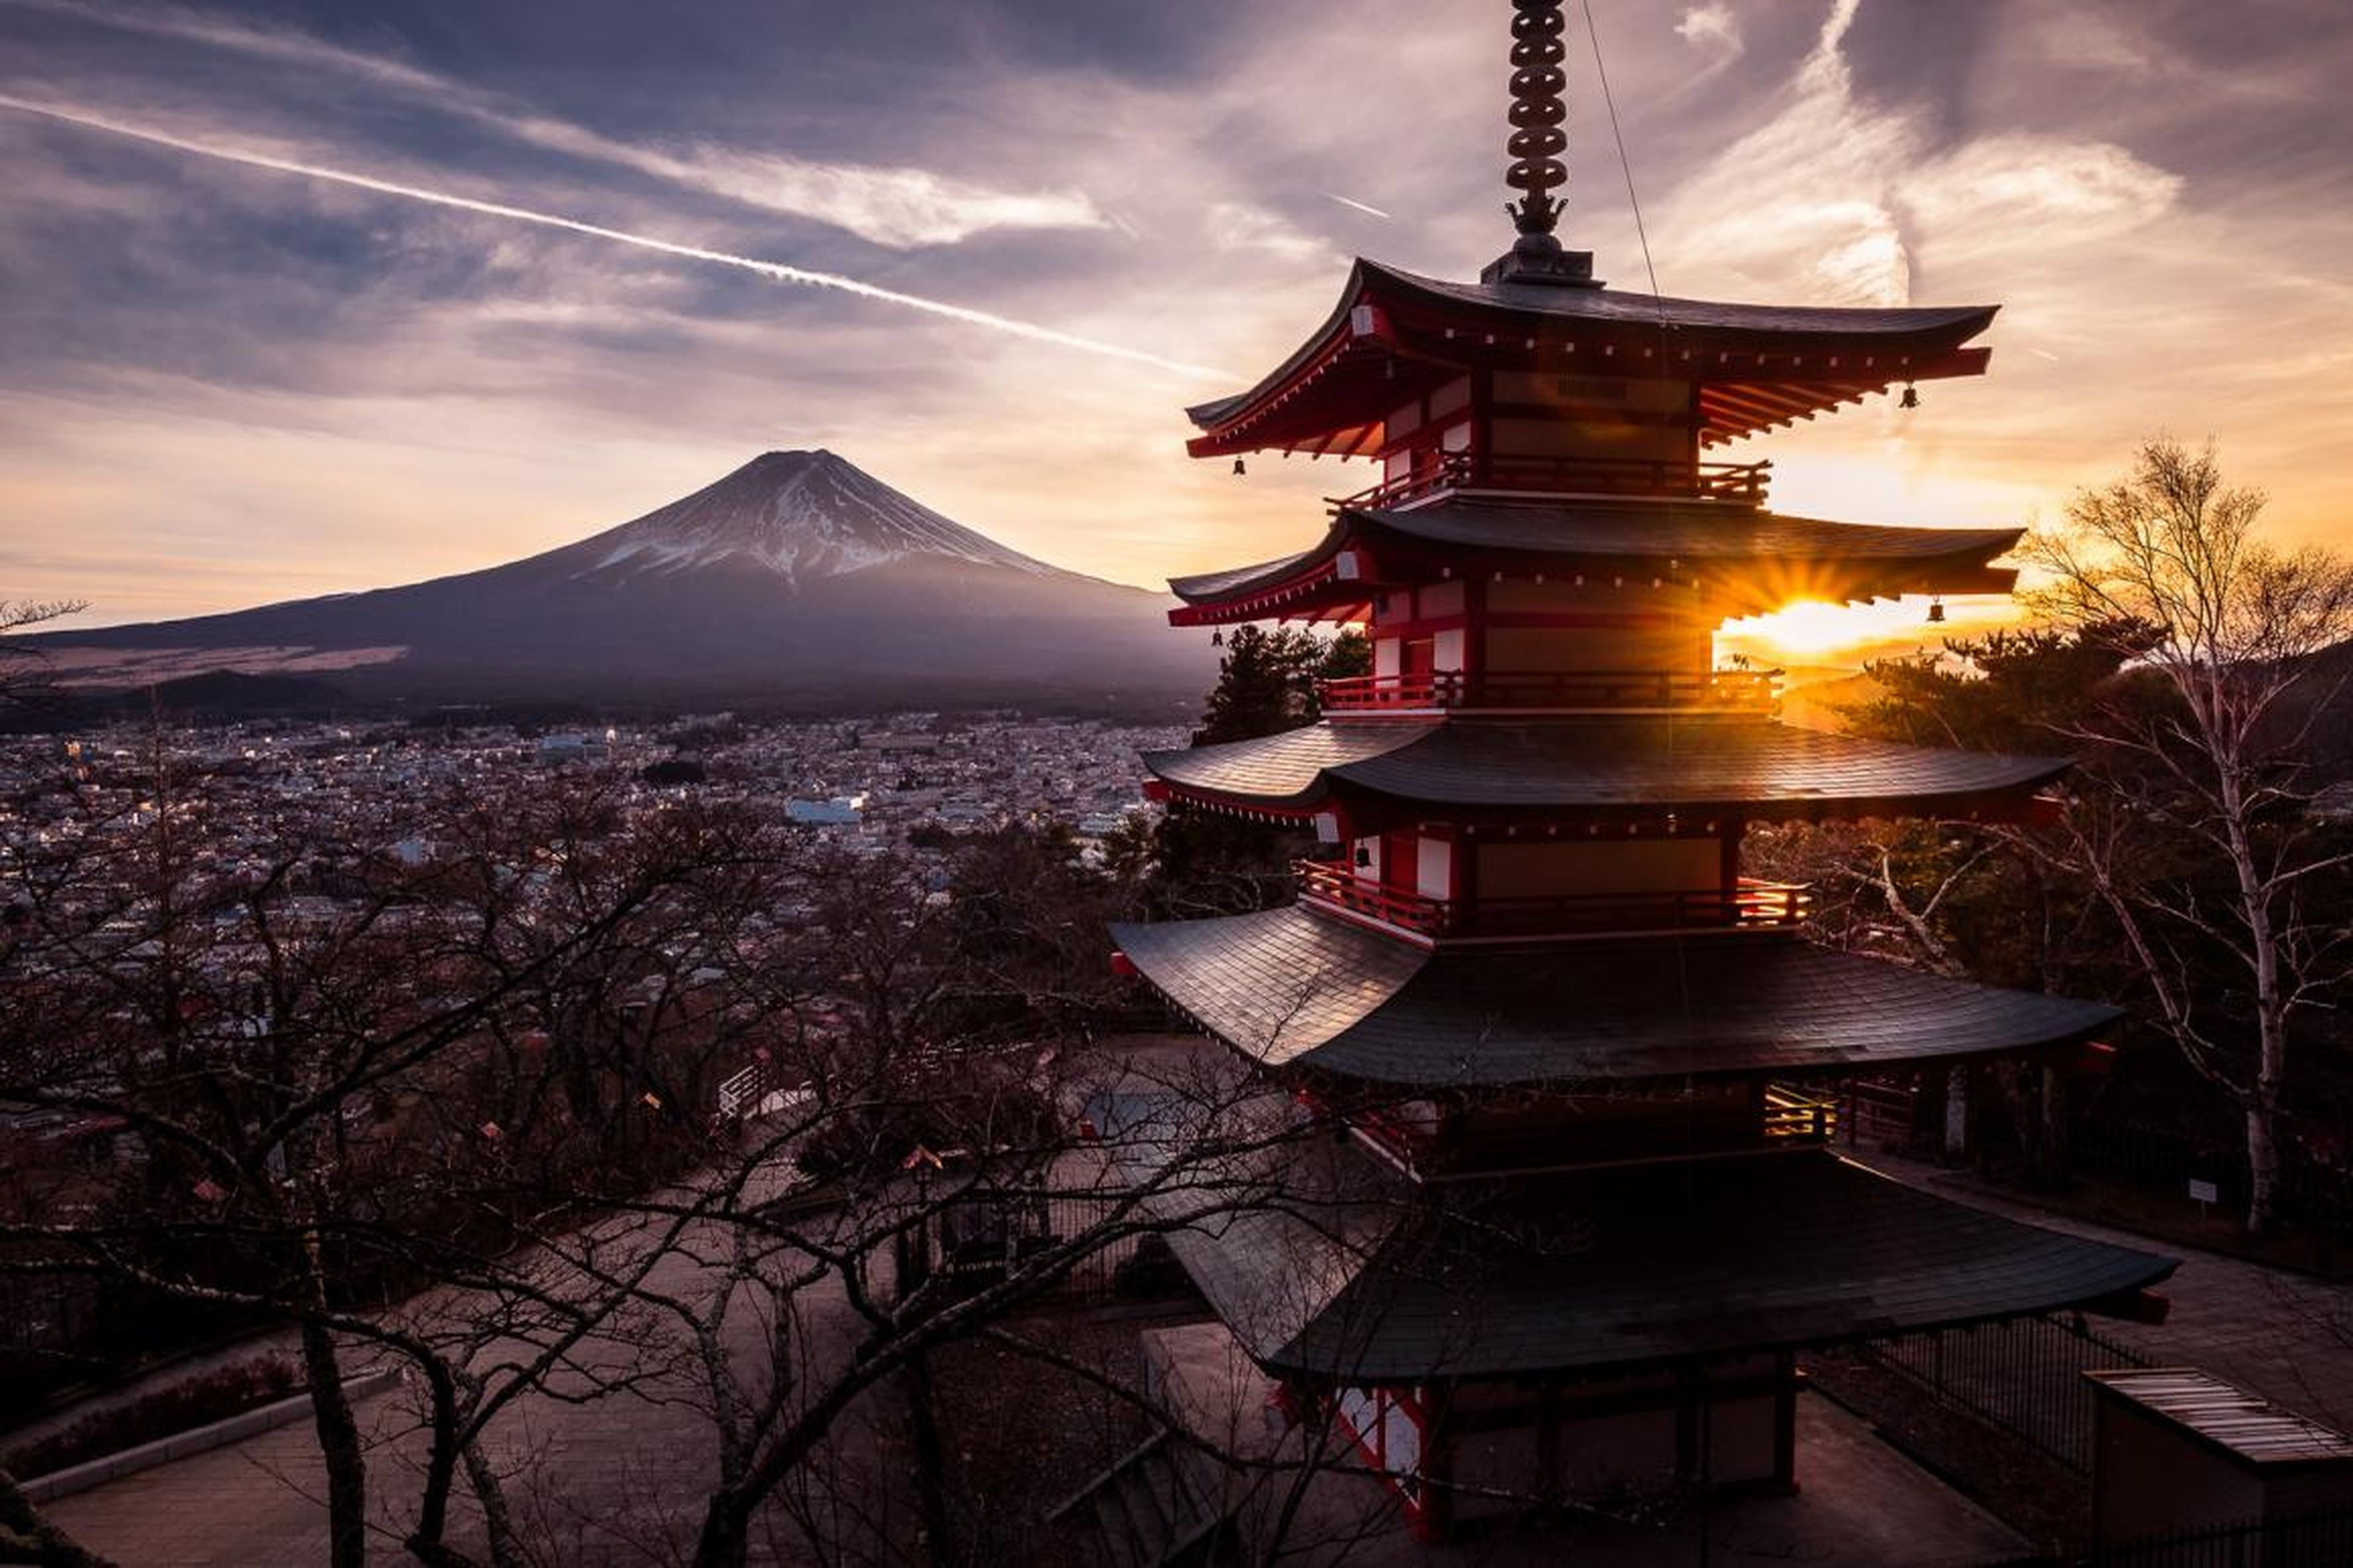 View from Mount Fuji of Chureito Pagoda, outside of Tokyo.